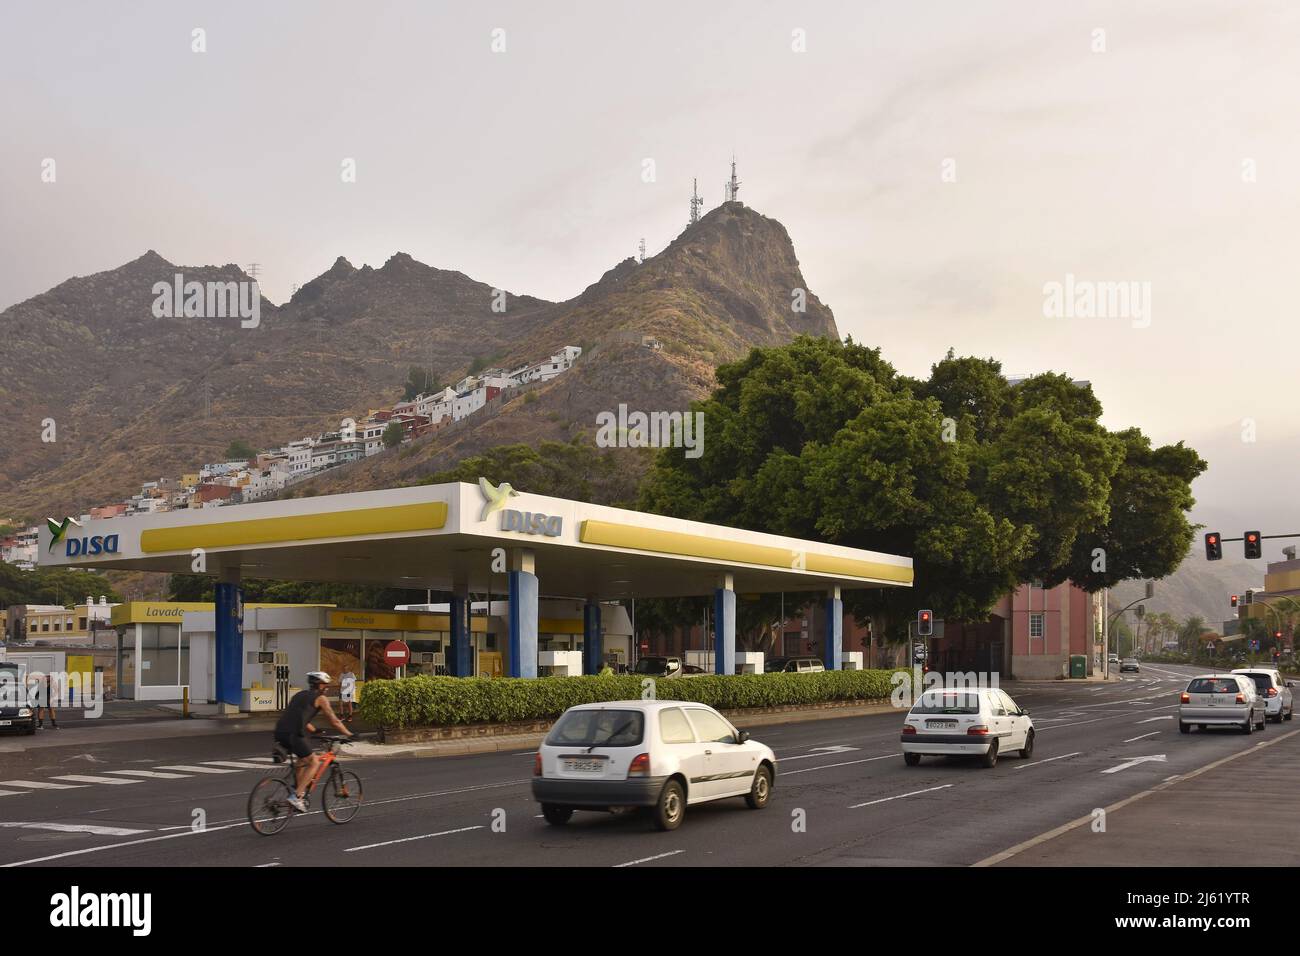 Disa gas station in the foothills of Anaga mountains, Santa Cruz de Tenerife Canary Islands Spain. Stock Photo